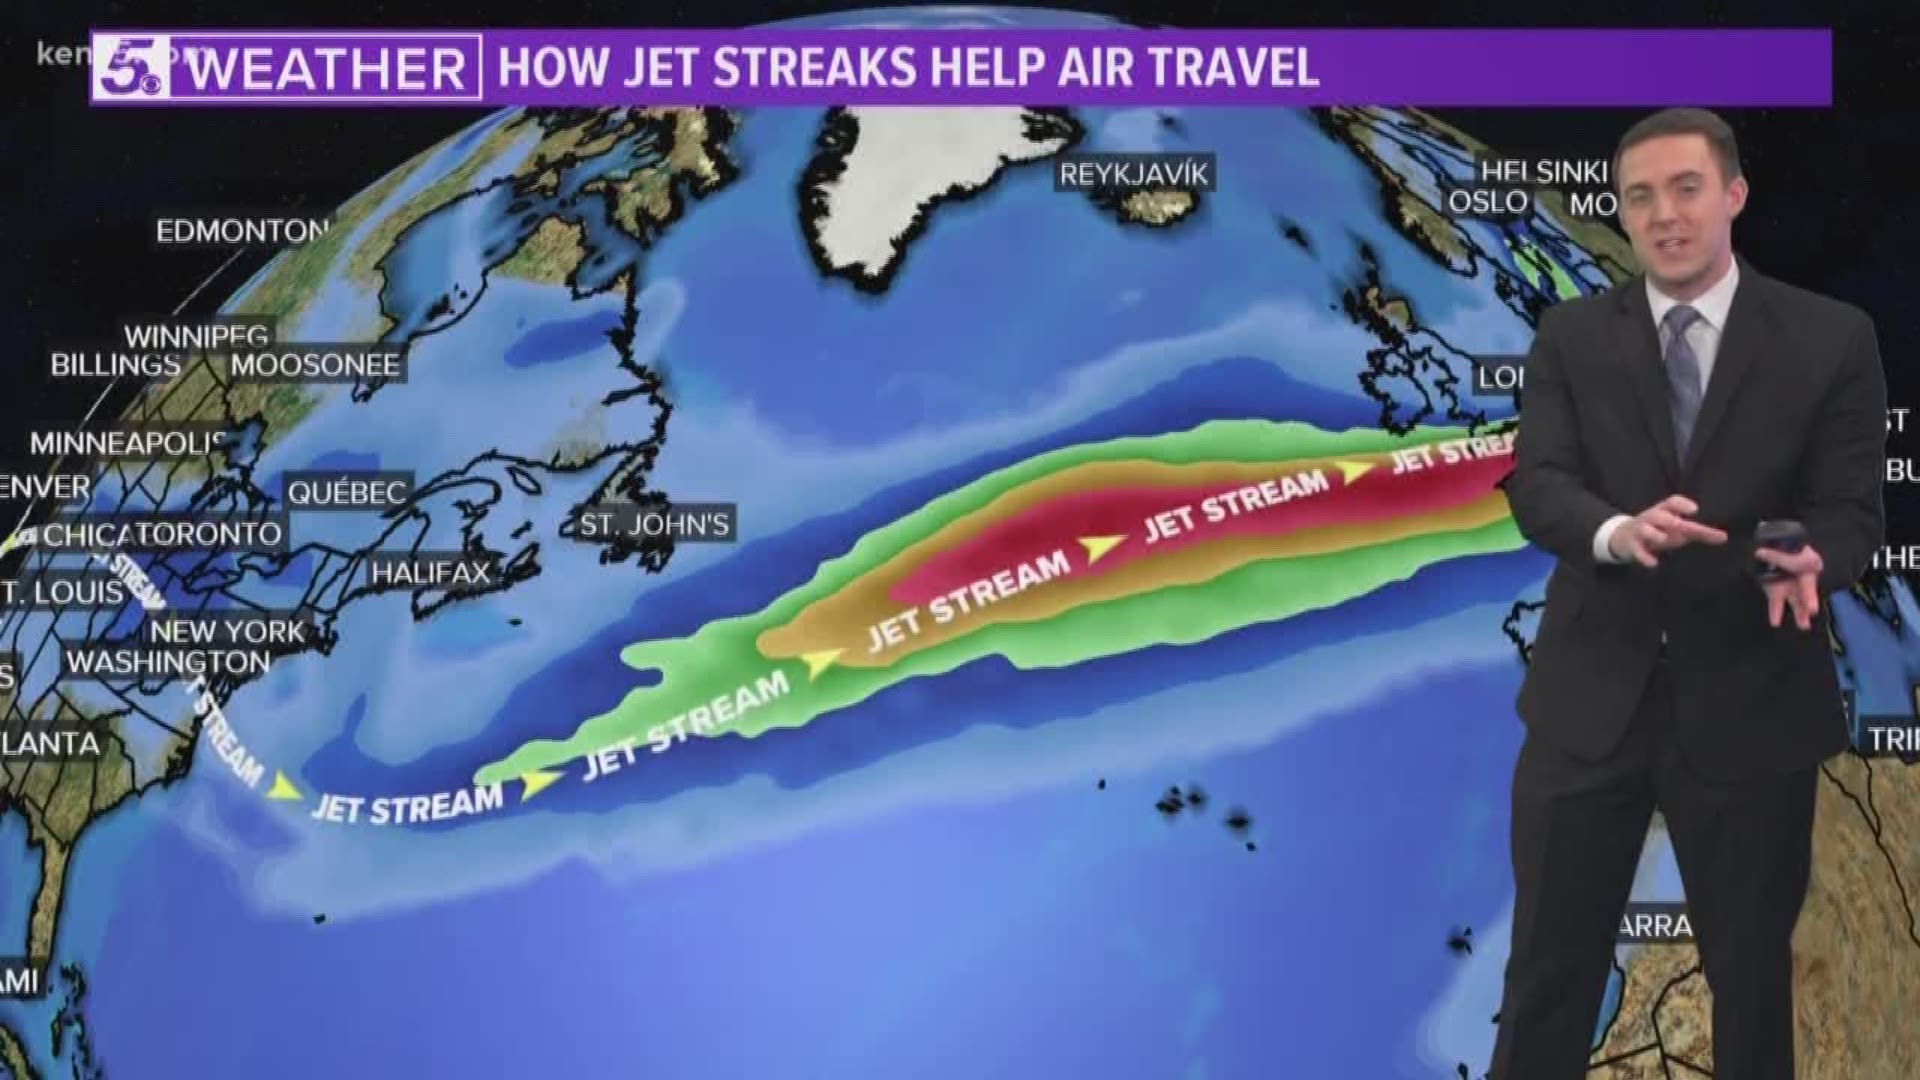 Meteorologists often talk about the jet stream as being a steering source for weather systems, but it can also be something that helps aircraft travel faster.